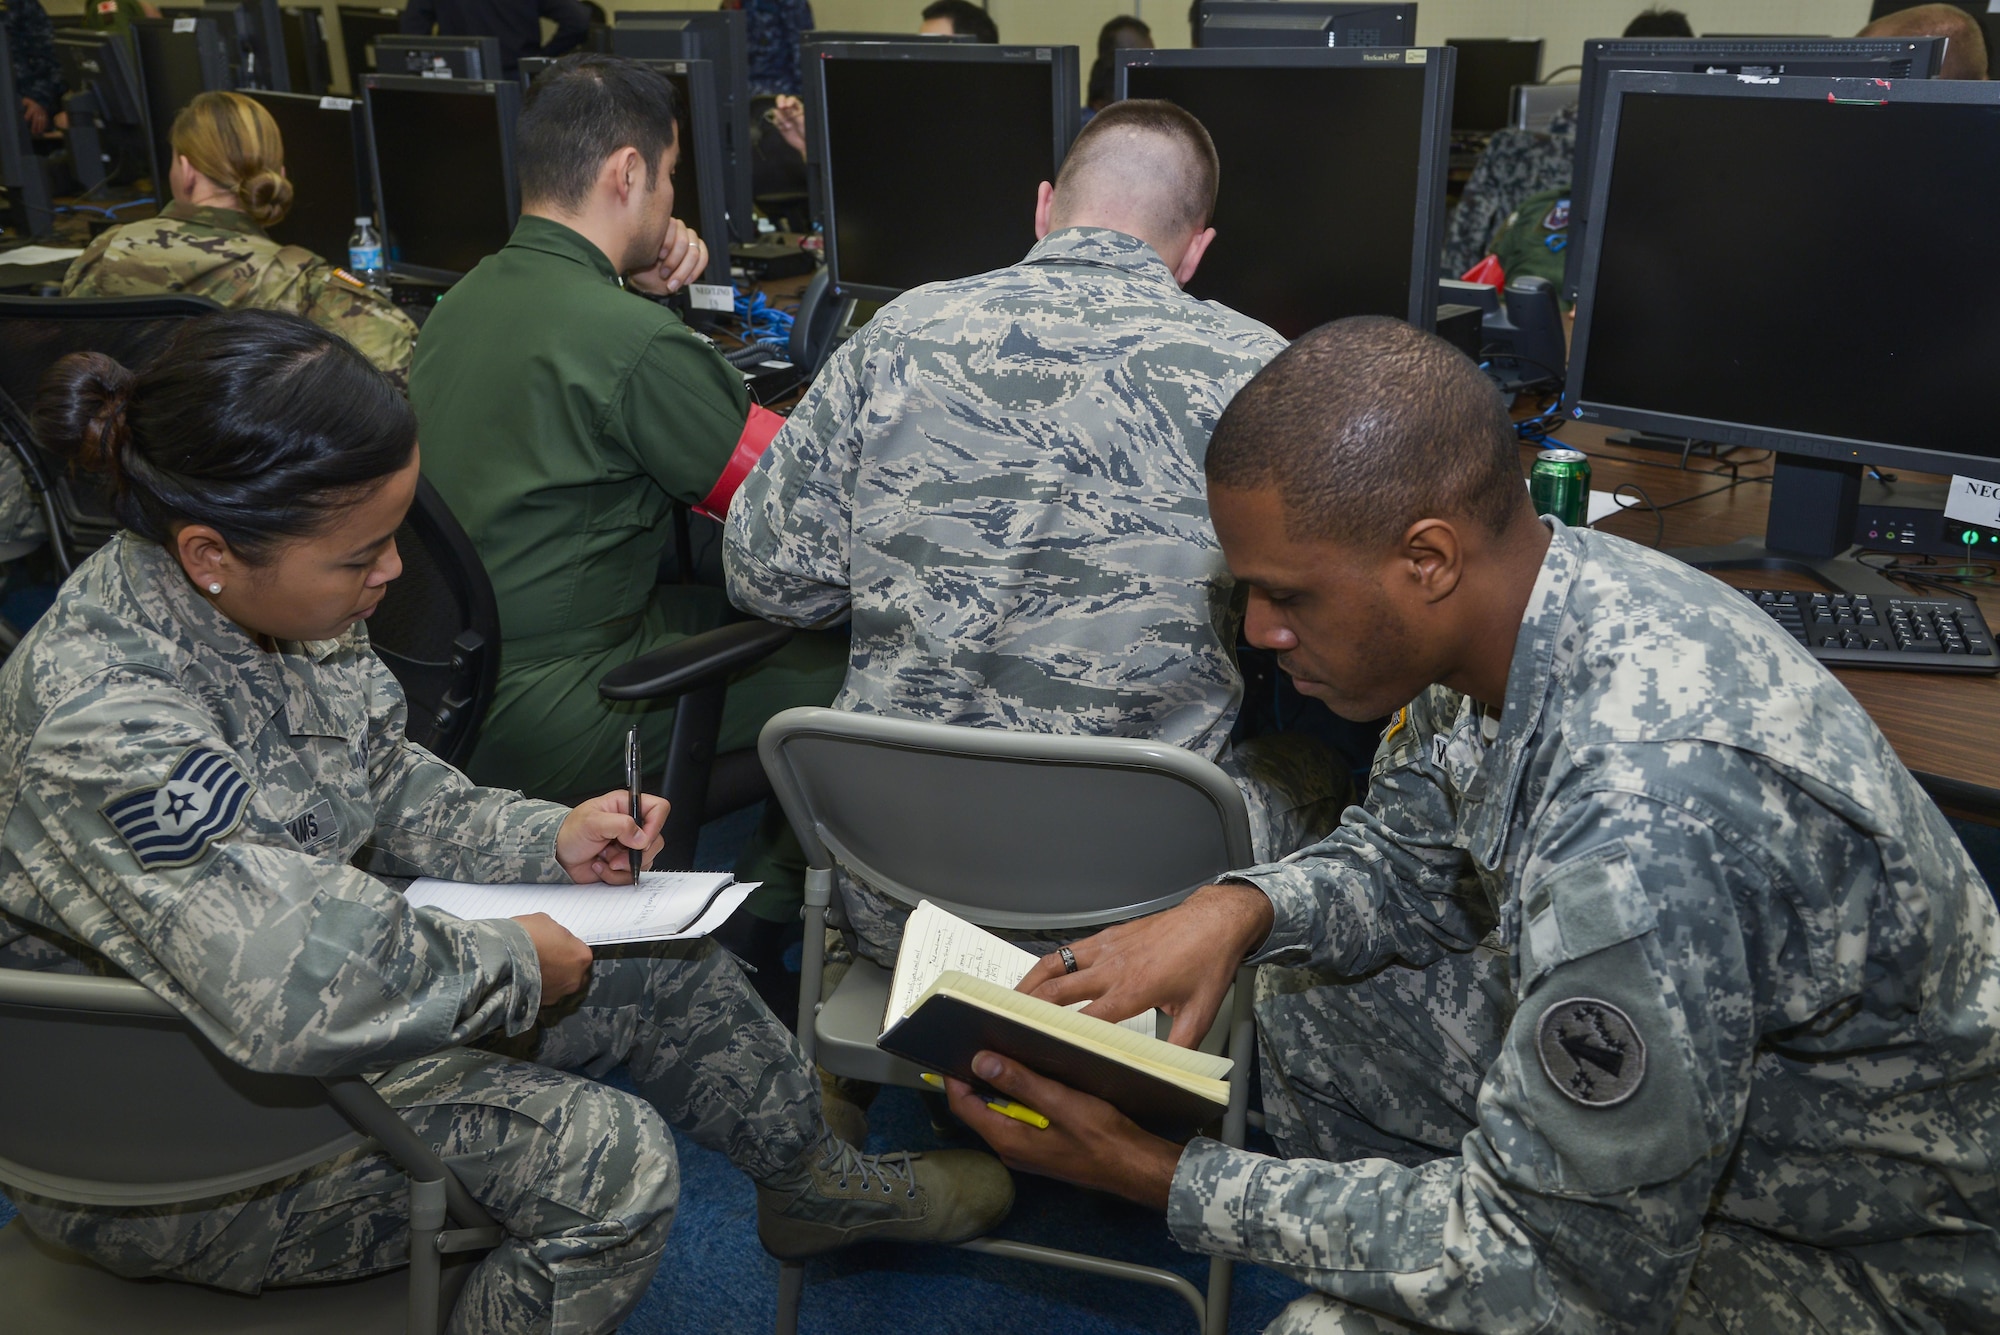 Japan Self-Defense Force and U.S. military members work on a scenario during exercise Keen Edge 16 at Yokota Air Base, Japan, Jan. 21, 2016. The exercise focused on bilateral coordination, force protection, host nation support, ballistic missile defense and non-combatant evacuation operations in Japan. (U.S. Air Force photo/Senior Airman David Owsianka)